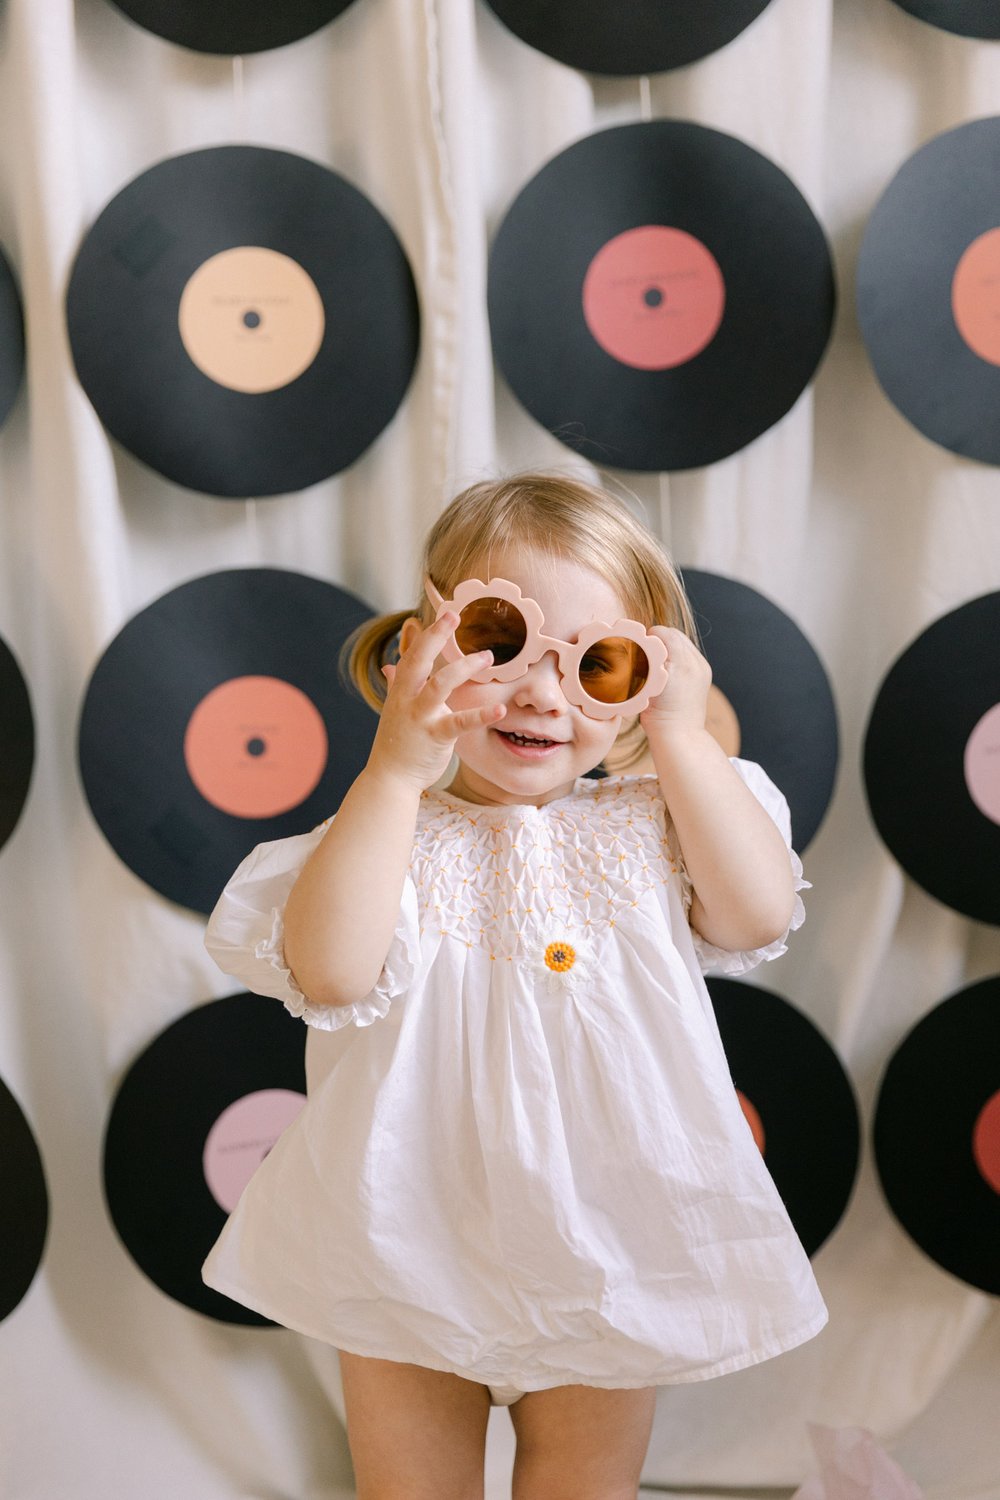 DIY Record Wall Tutorial "Two Groovy" Birthday Party Theme - Inspiration and Free Downloads Calgary Family Lifestyle Photographer Jennie Guenard Photography